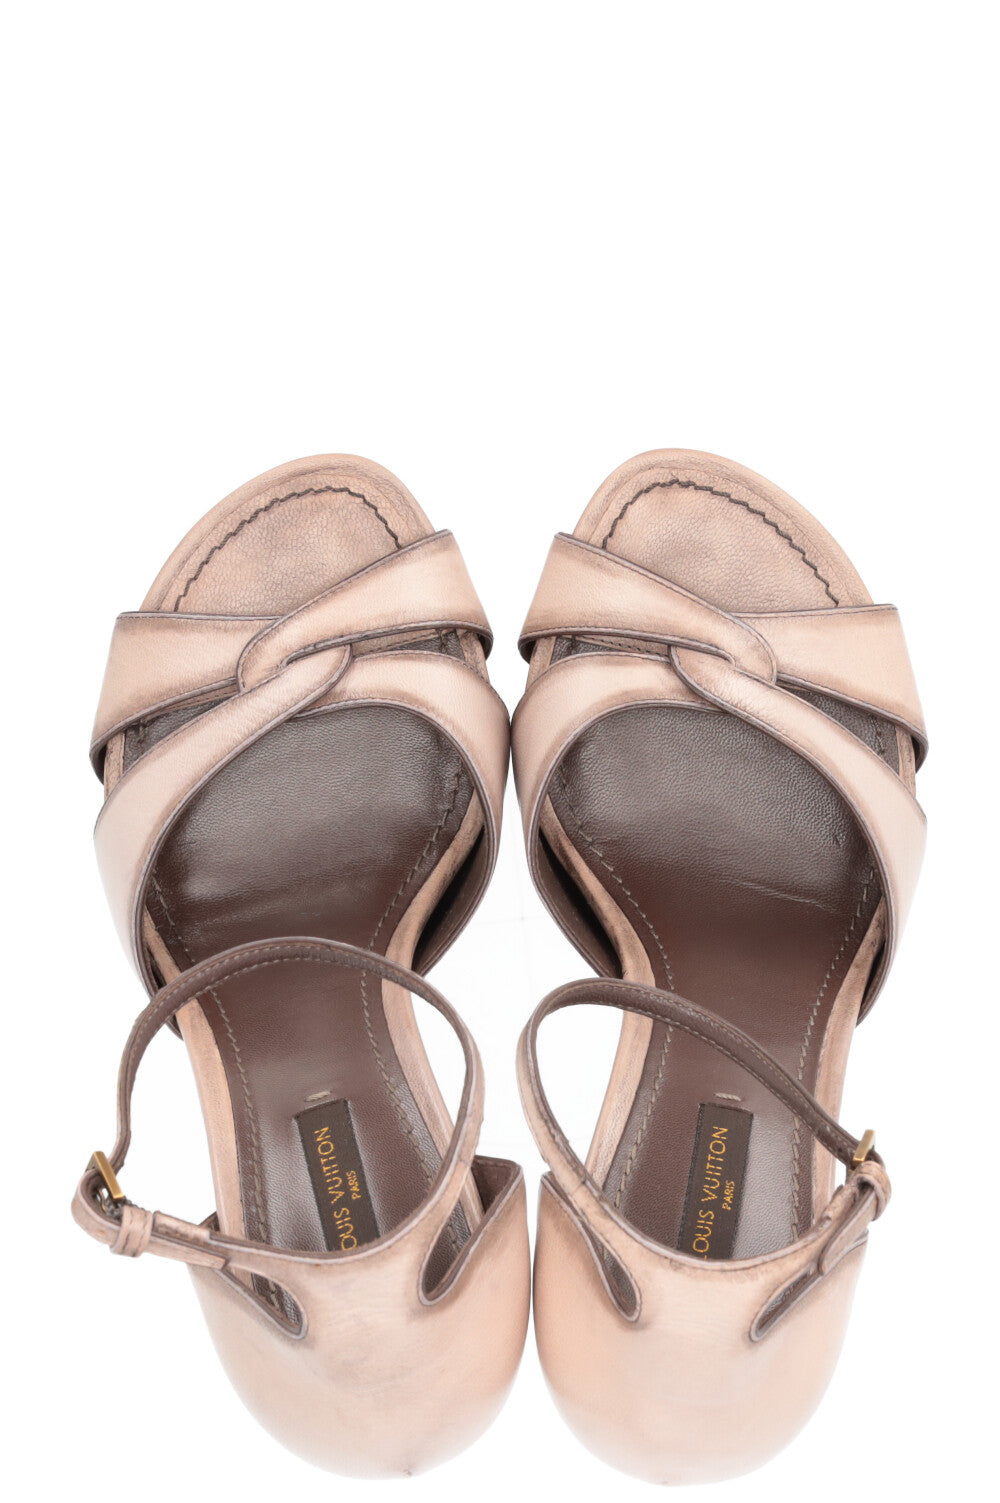 LOUIS VUITTON High Heels Leather Taupe